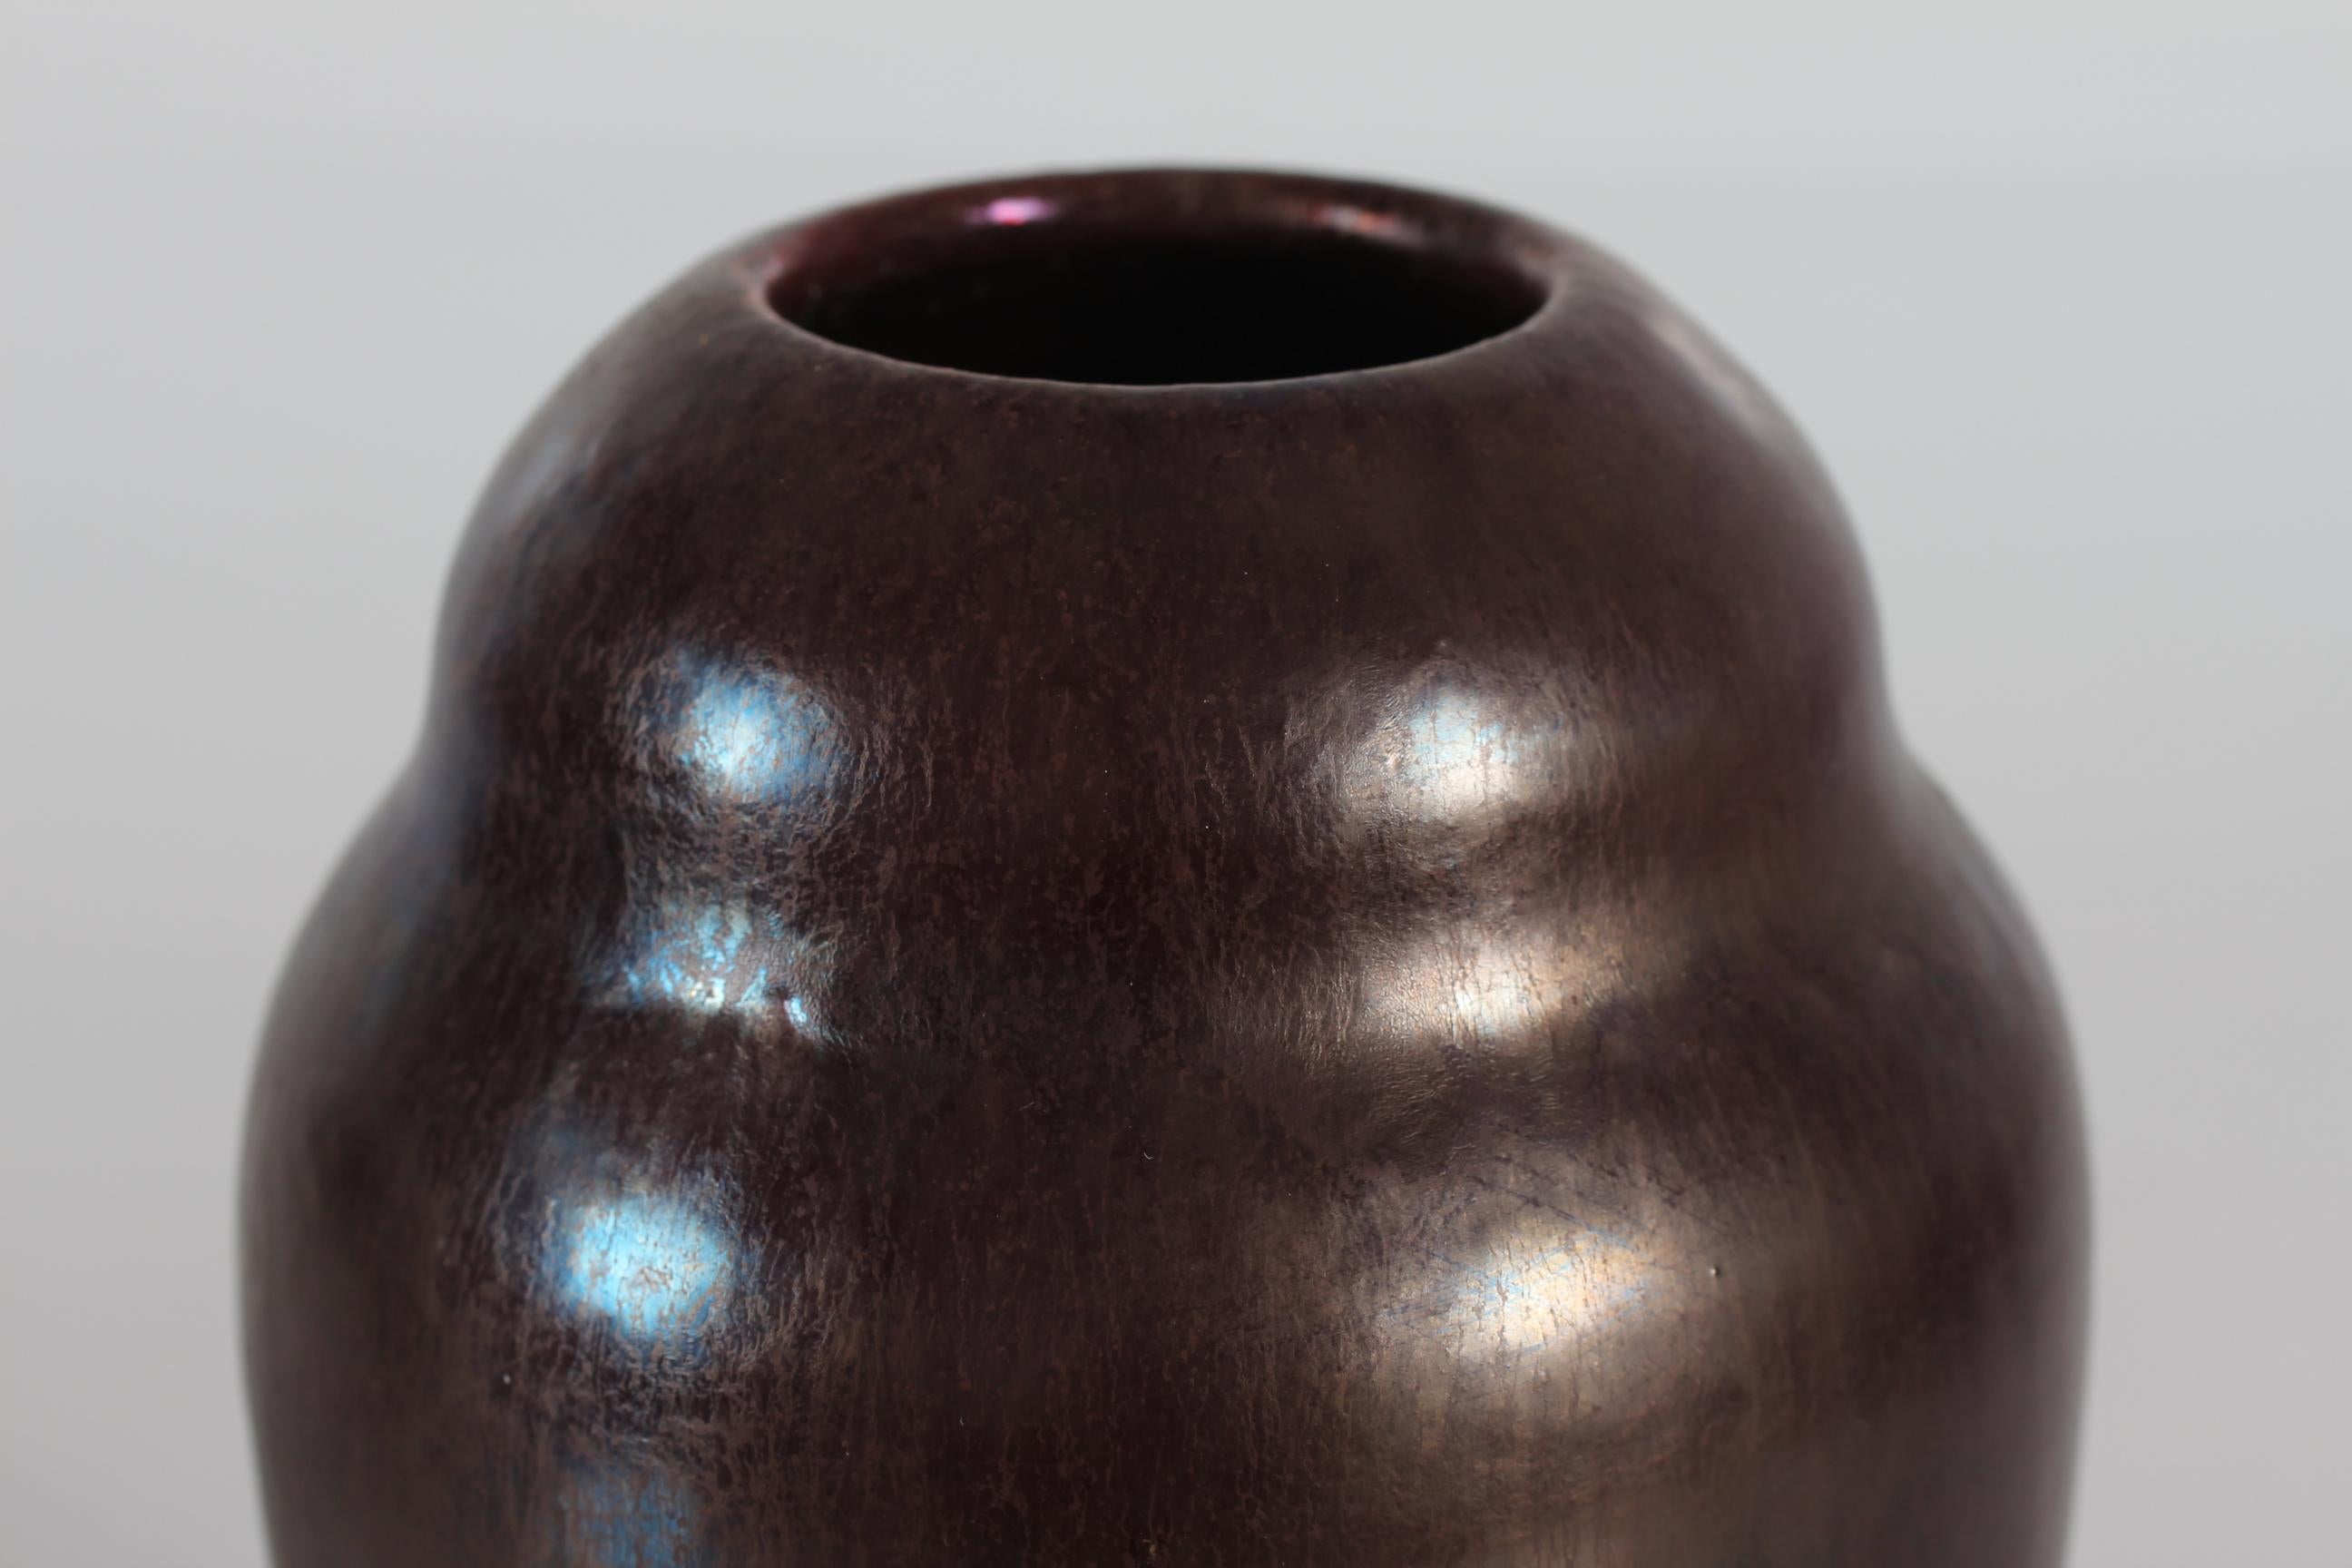 Ceramic vase made by the Danish ceramist Søren Kongstrand (1872-1951) - signed SK for Søren Kongstrand
The vase is decorated with a red brown Lustre glaze.

Søren Kongstrand and his Assisten Jens Pedersen were pioneers of the time and well know